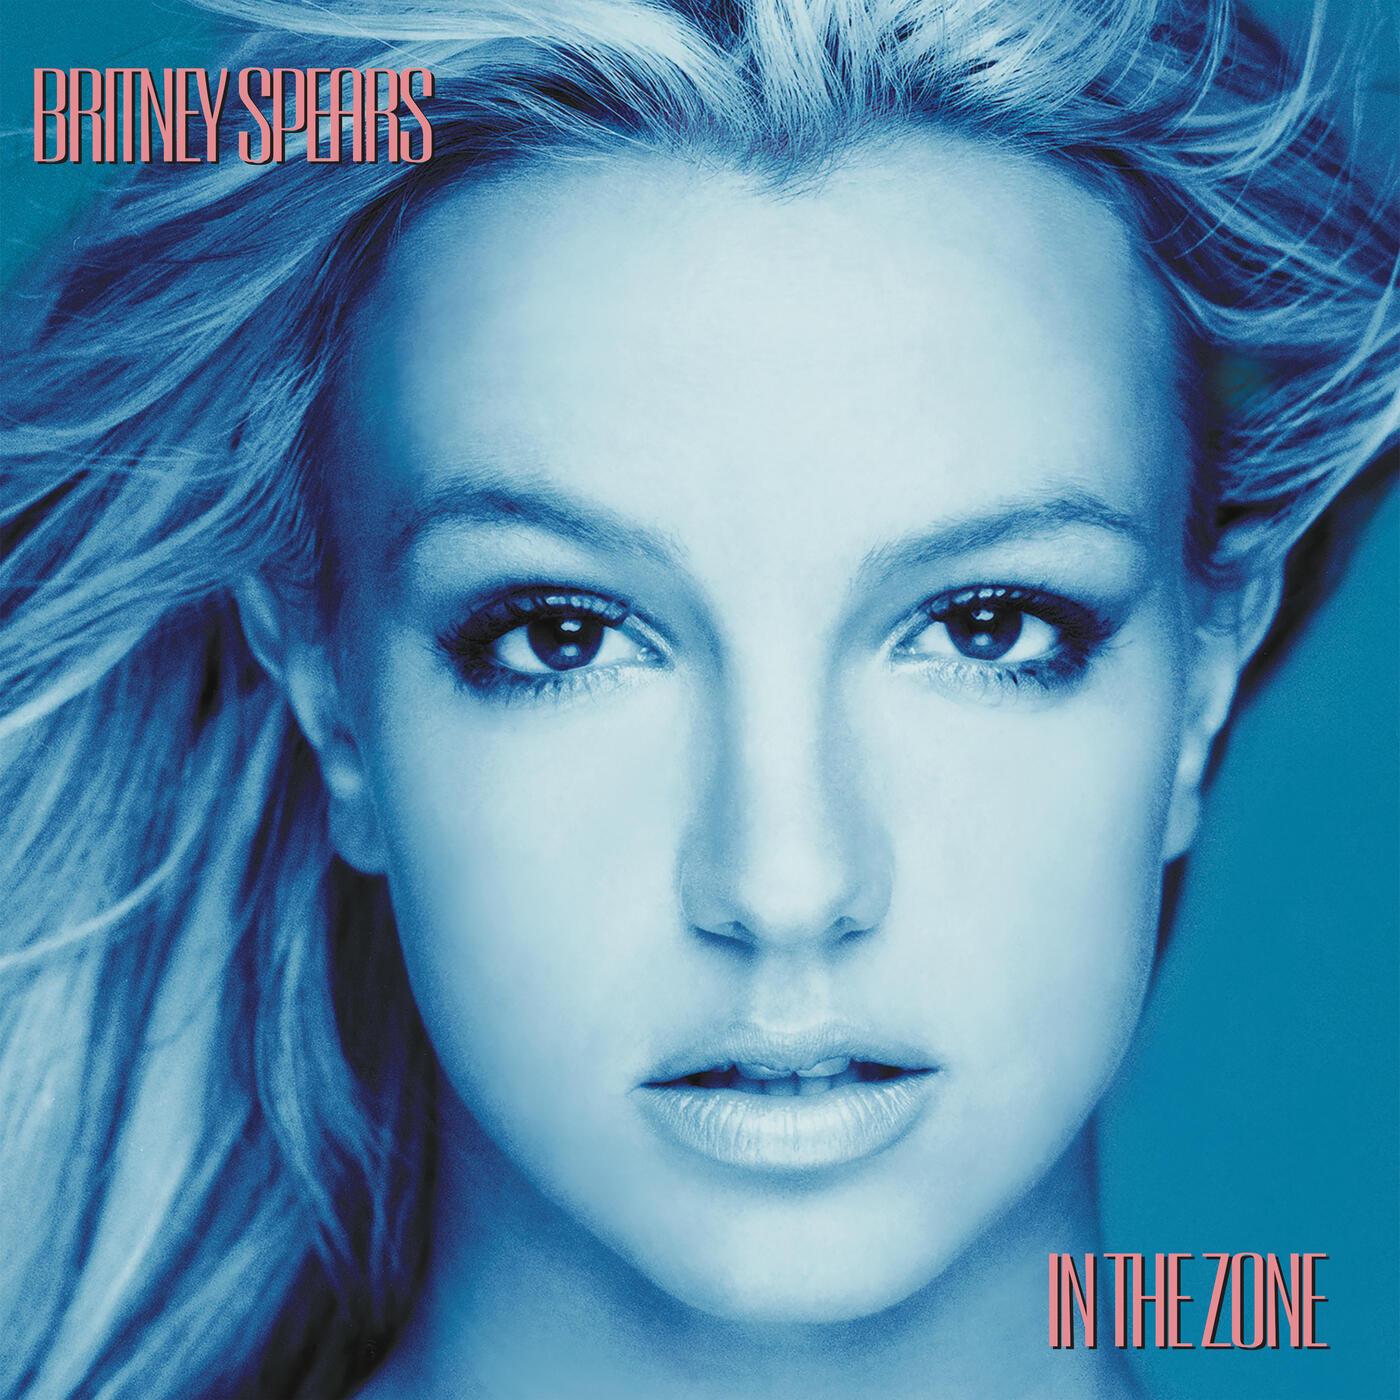 britney spears in the zone tour